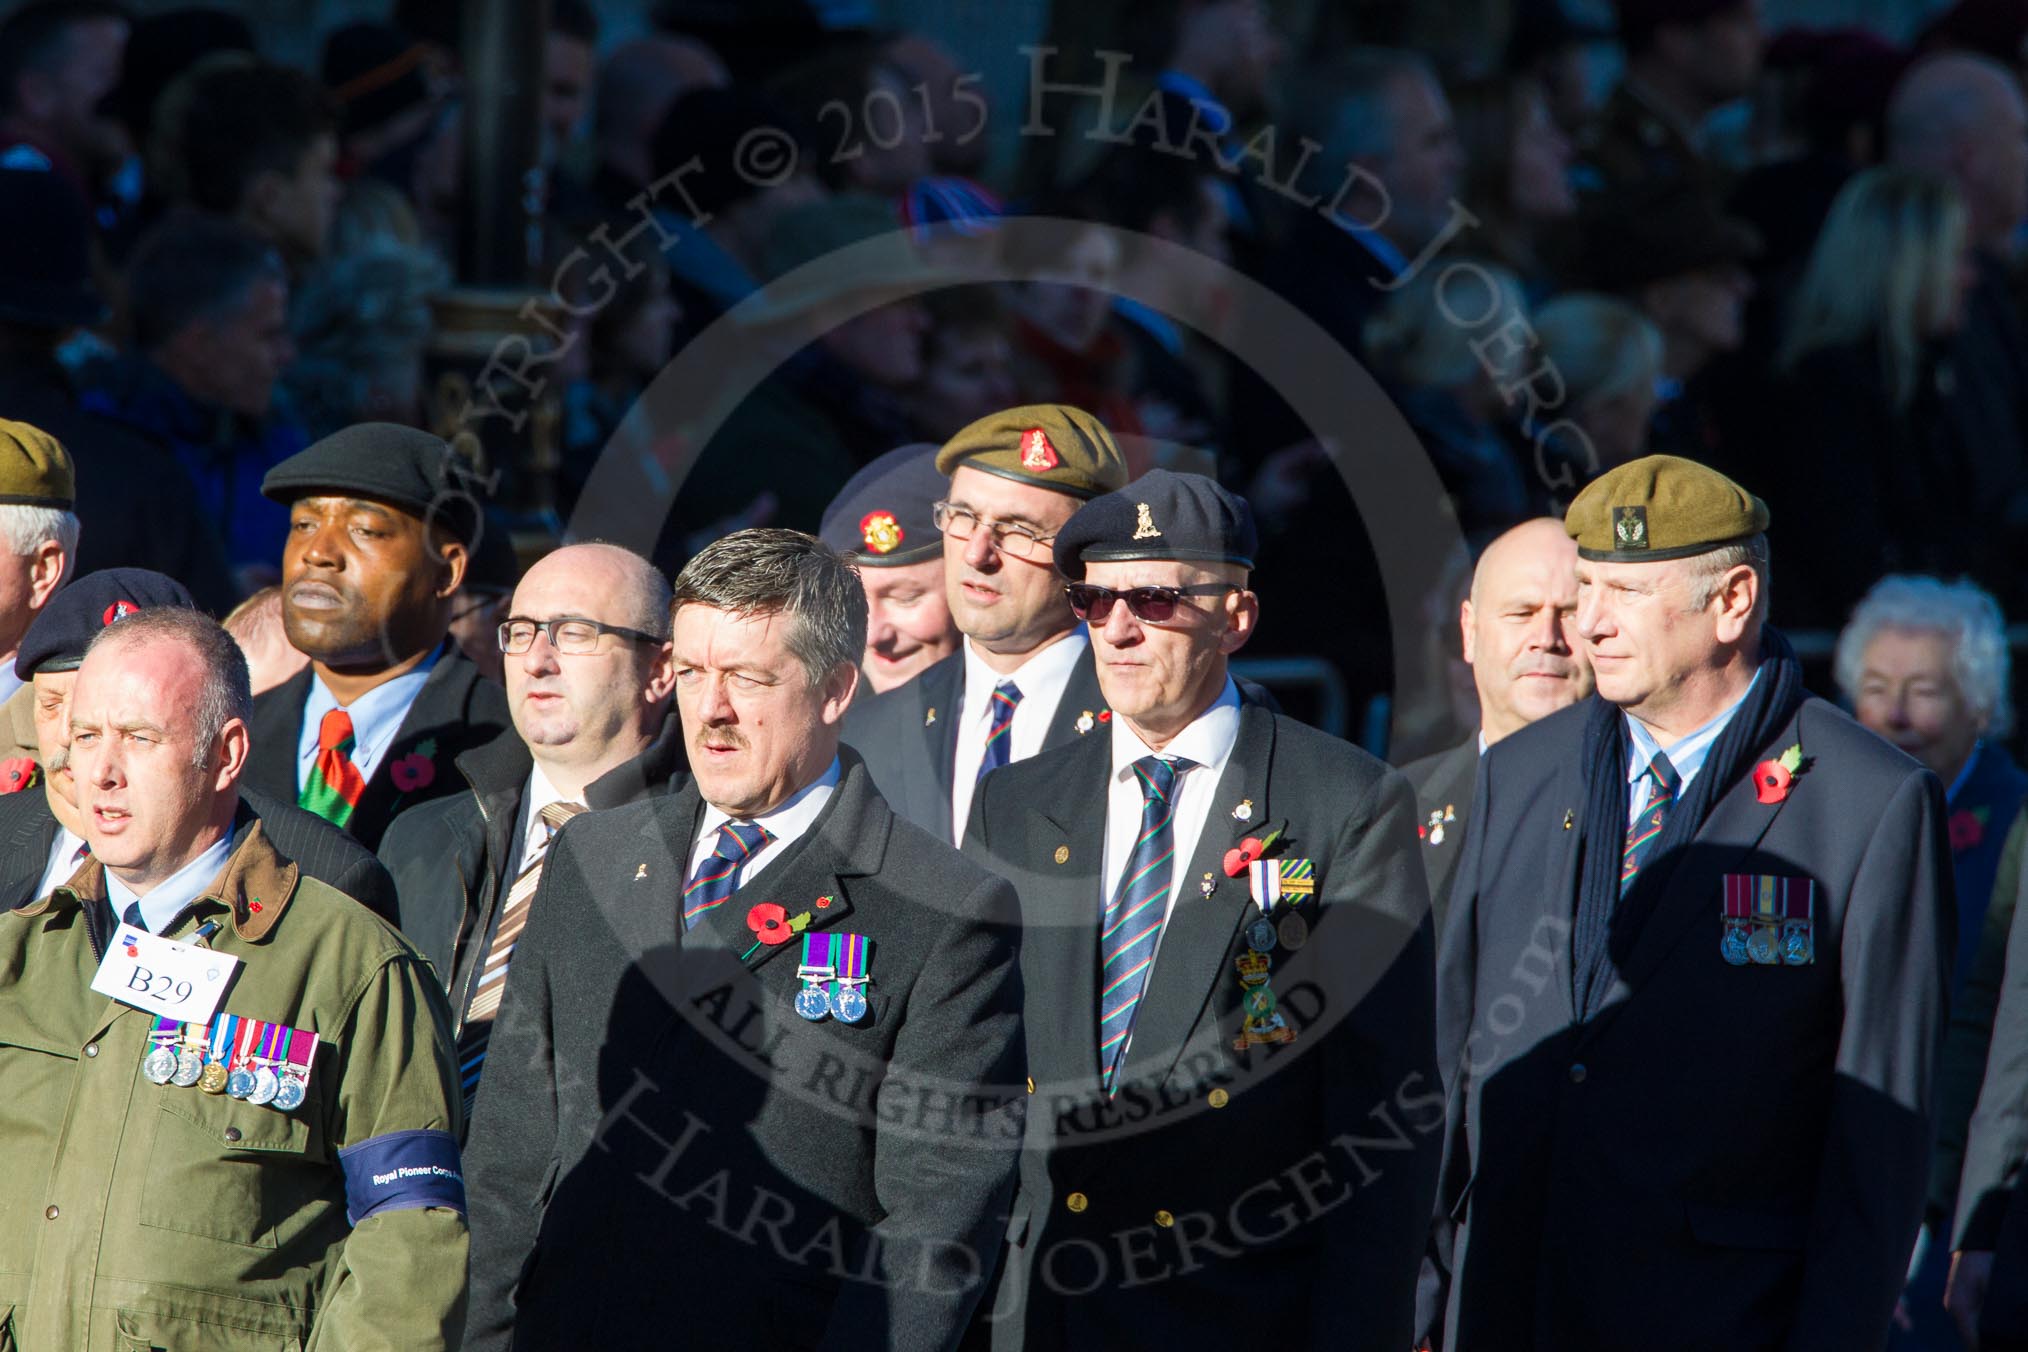 Remembrance Sunday Cenotaph March Past 2013: B29 - Royal Pioneer Corps Association..
Press stand opposite the Foreign Office building, Whitehall, London SW1,
London,
Greater London,
United Kingdom,
on 10 November 2013 at 12:03, image #1559